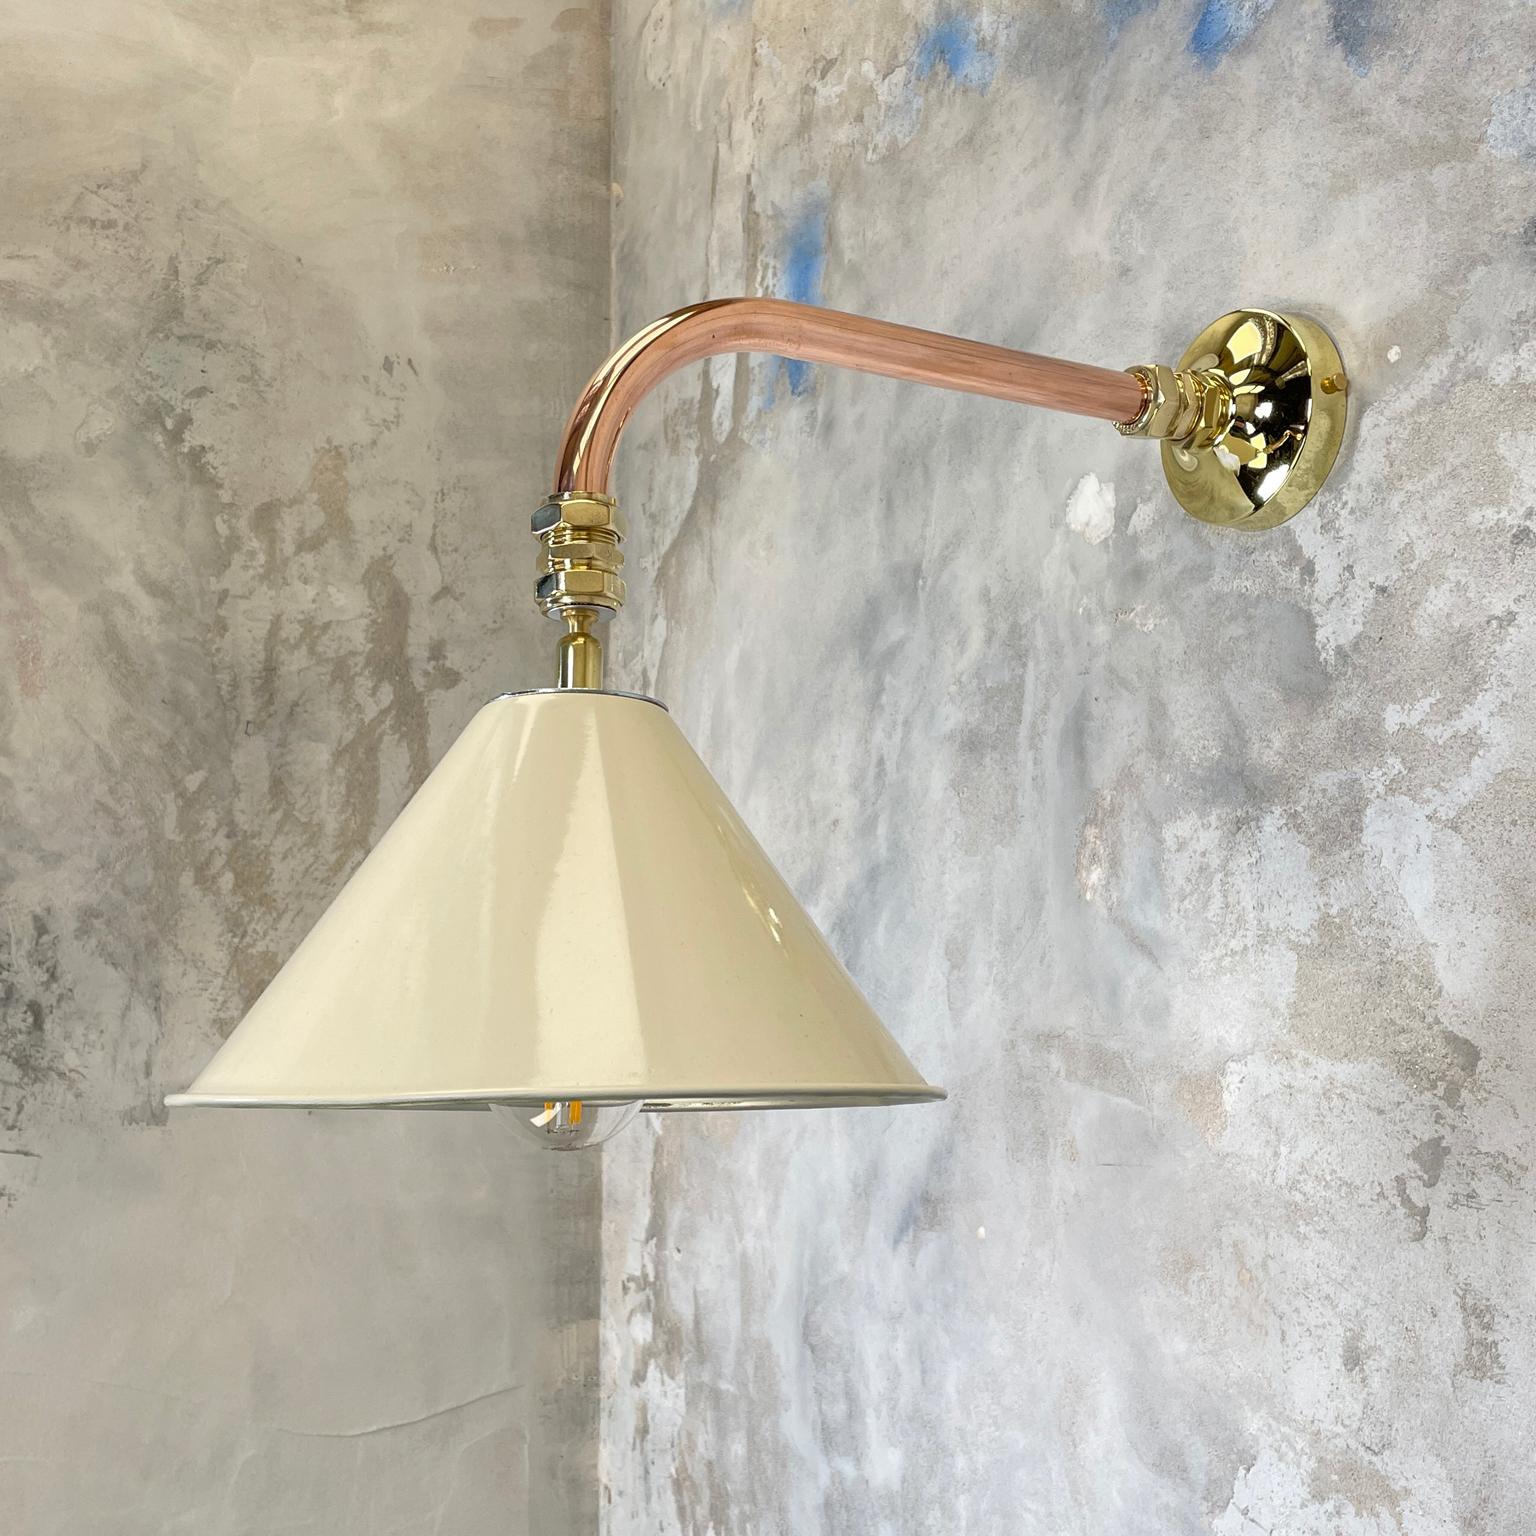 Late 20th Century 1980's Copper & Brass Cantilever Lamp Cream British Army Lamp Shade For Sale